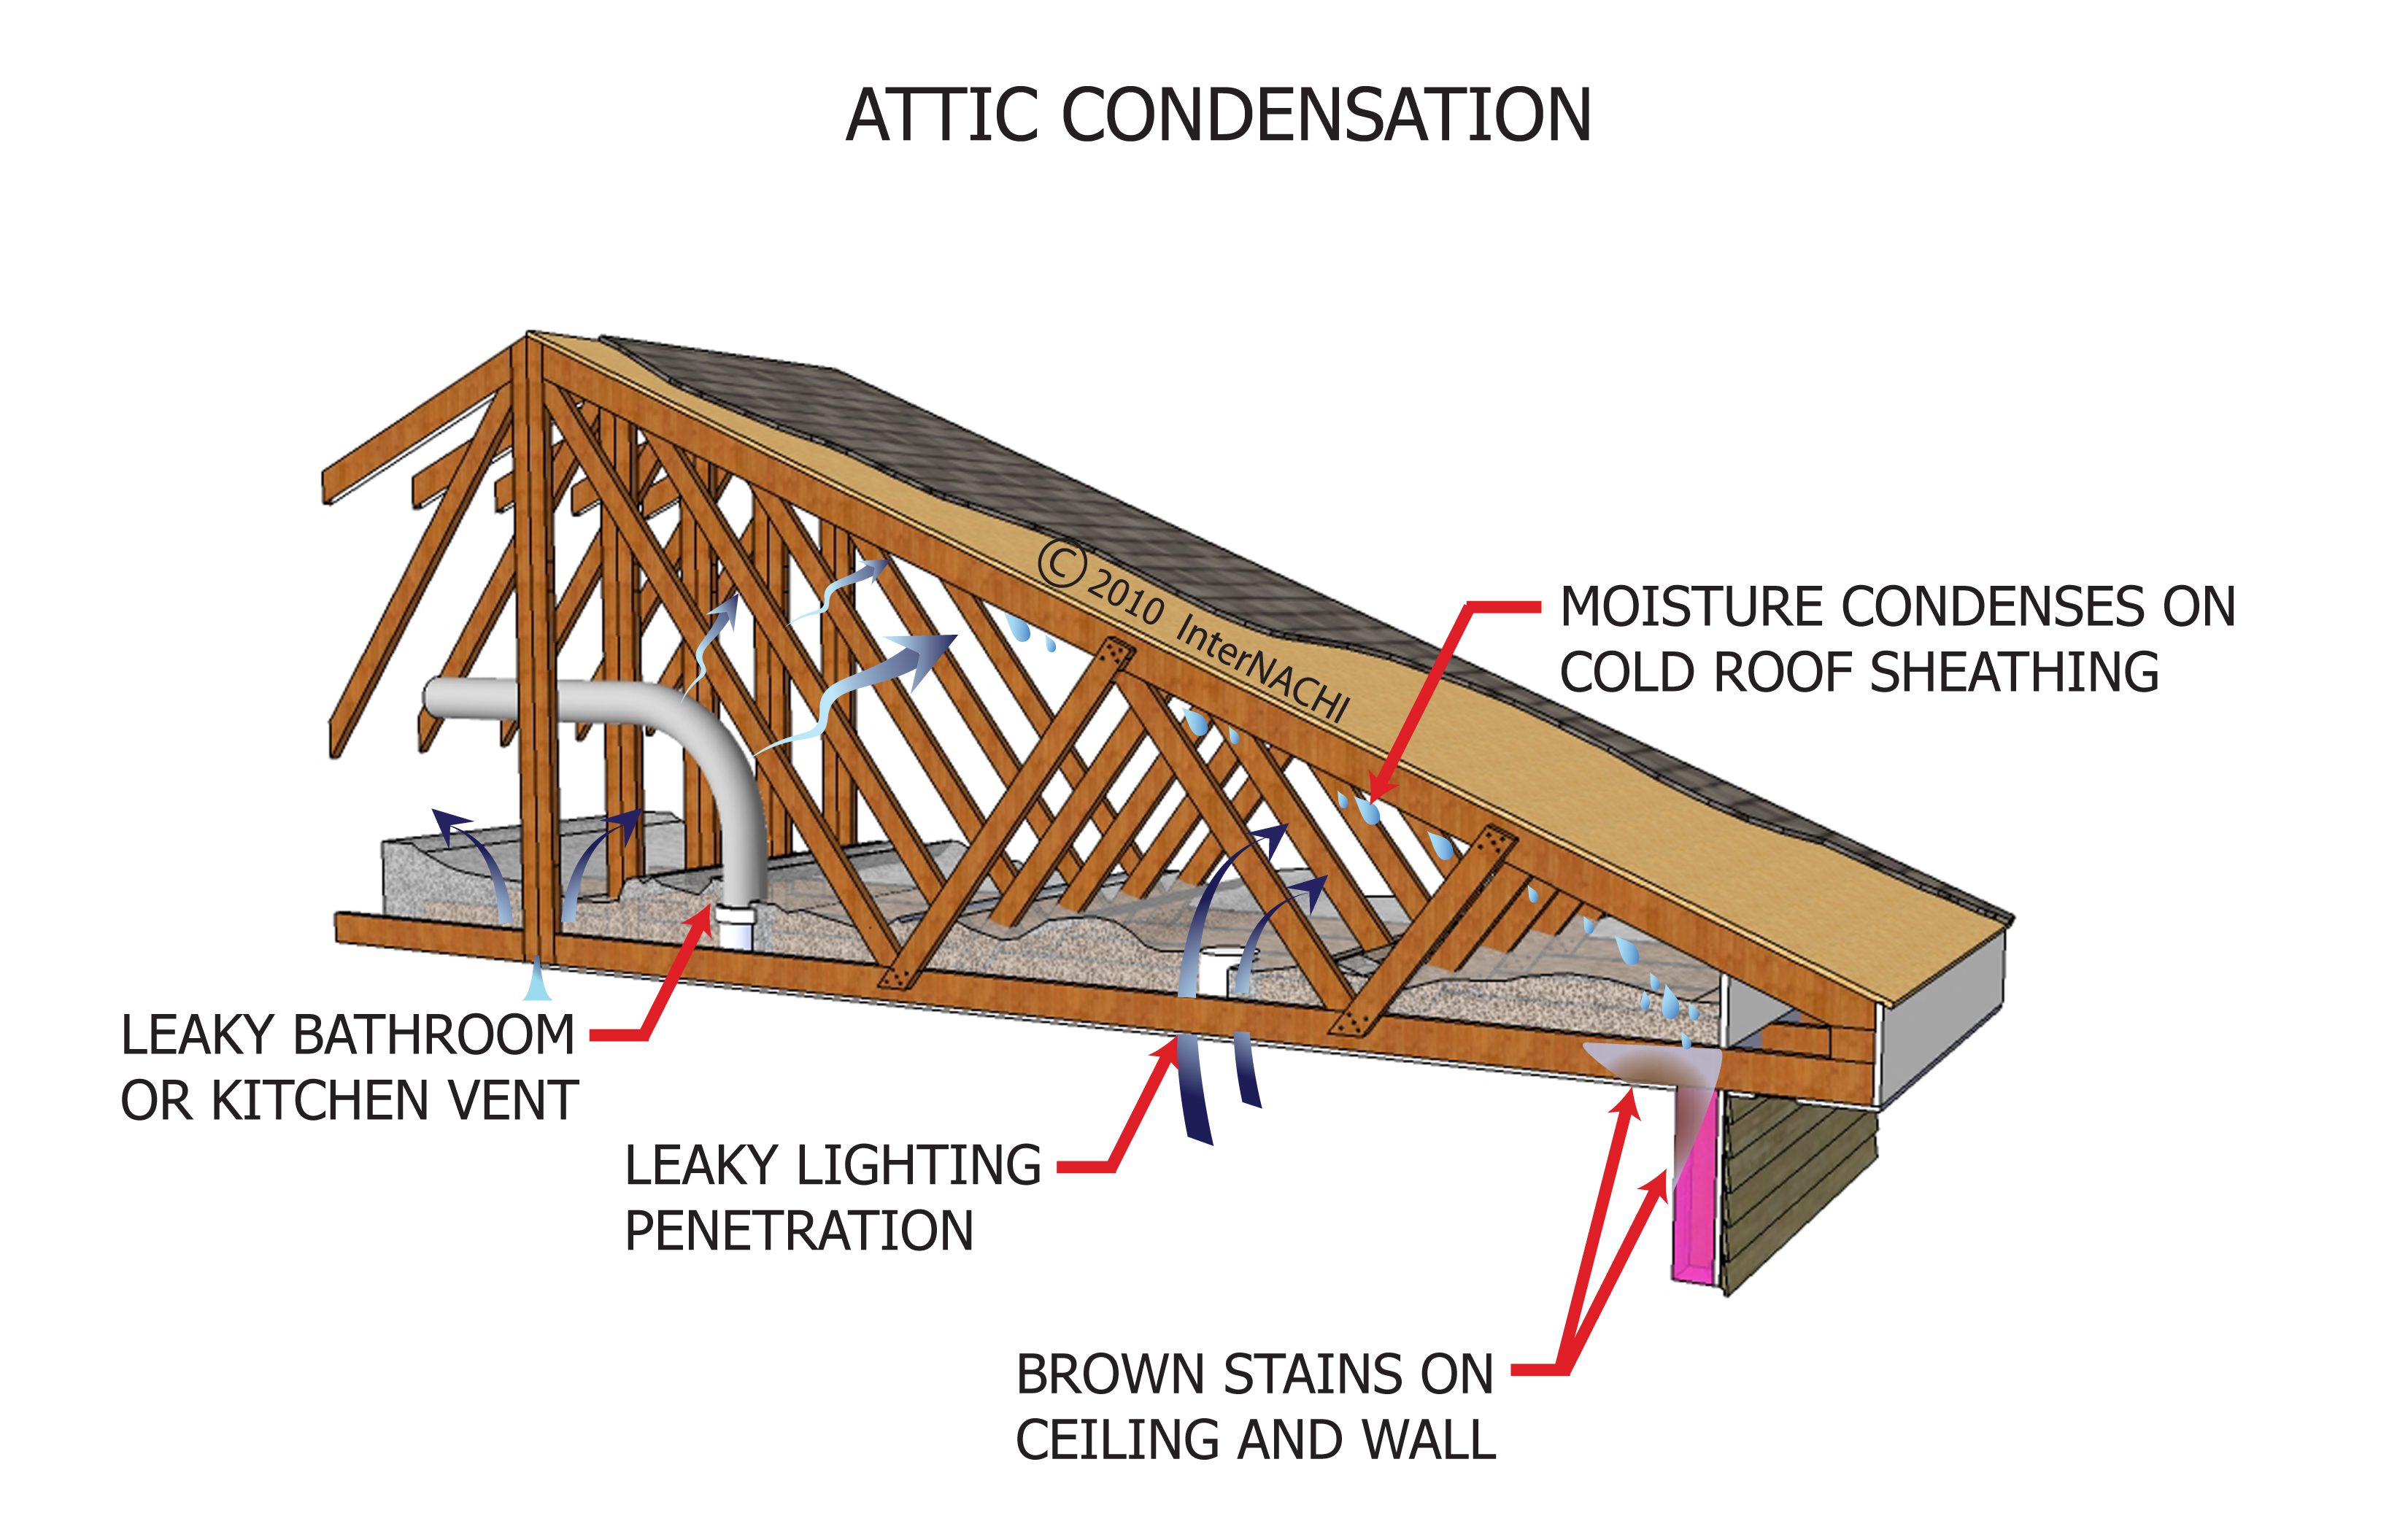 poor insulation and ventilation in the attic can cause mold